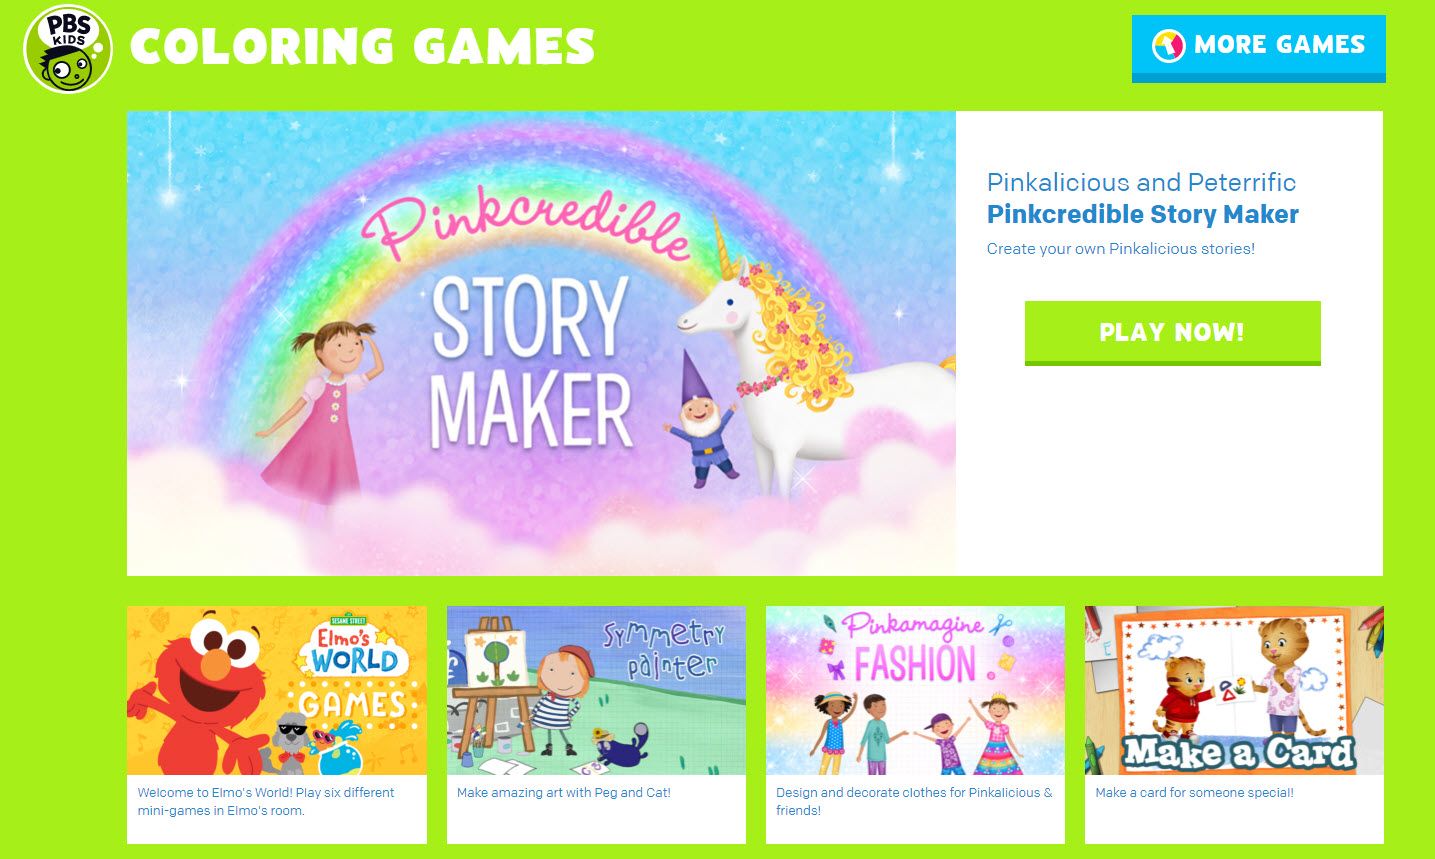 PBS Kids Coloring Games - online art games for kids